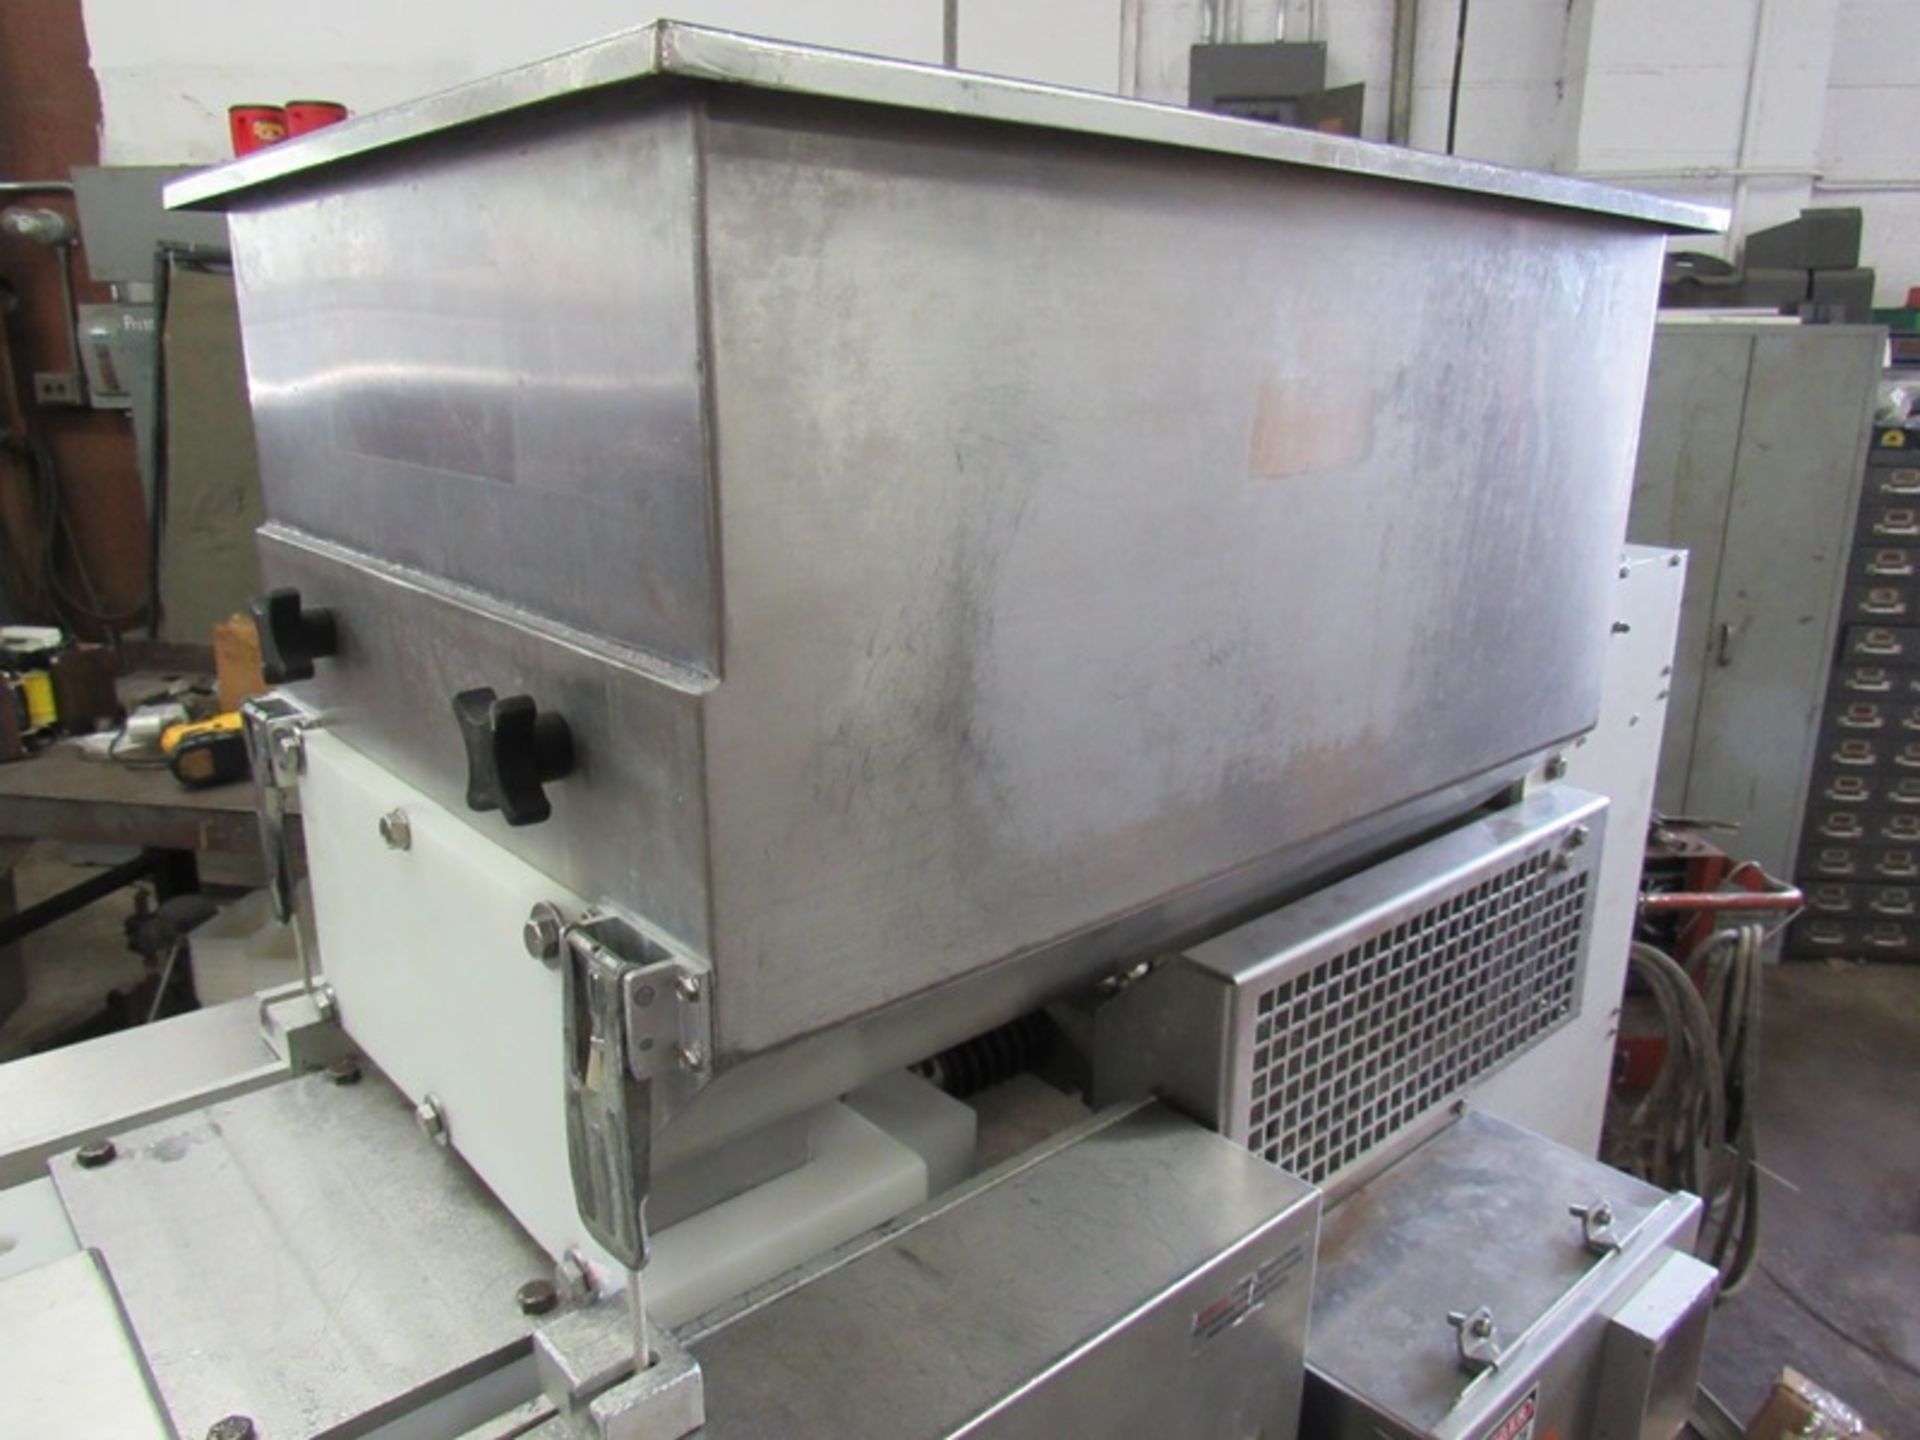 Nutec Mdl. 710 Portable Patty Forming Machine with paper feed setup with 4 1/2" diameter X 3/8" - Image 4 of 10